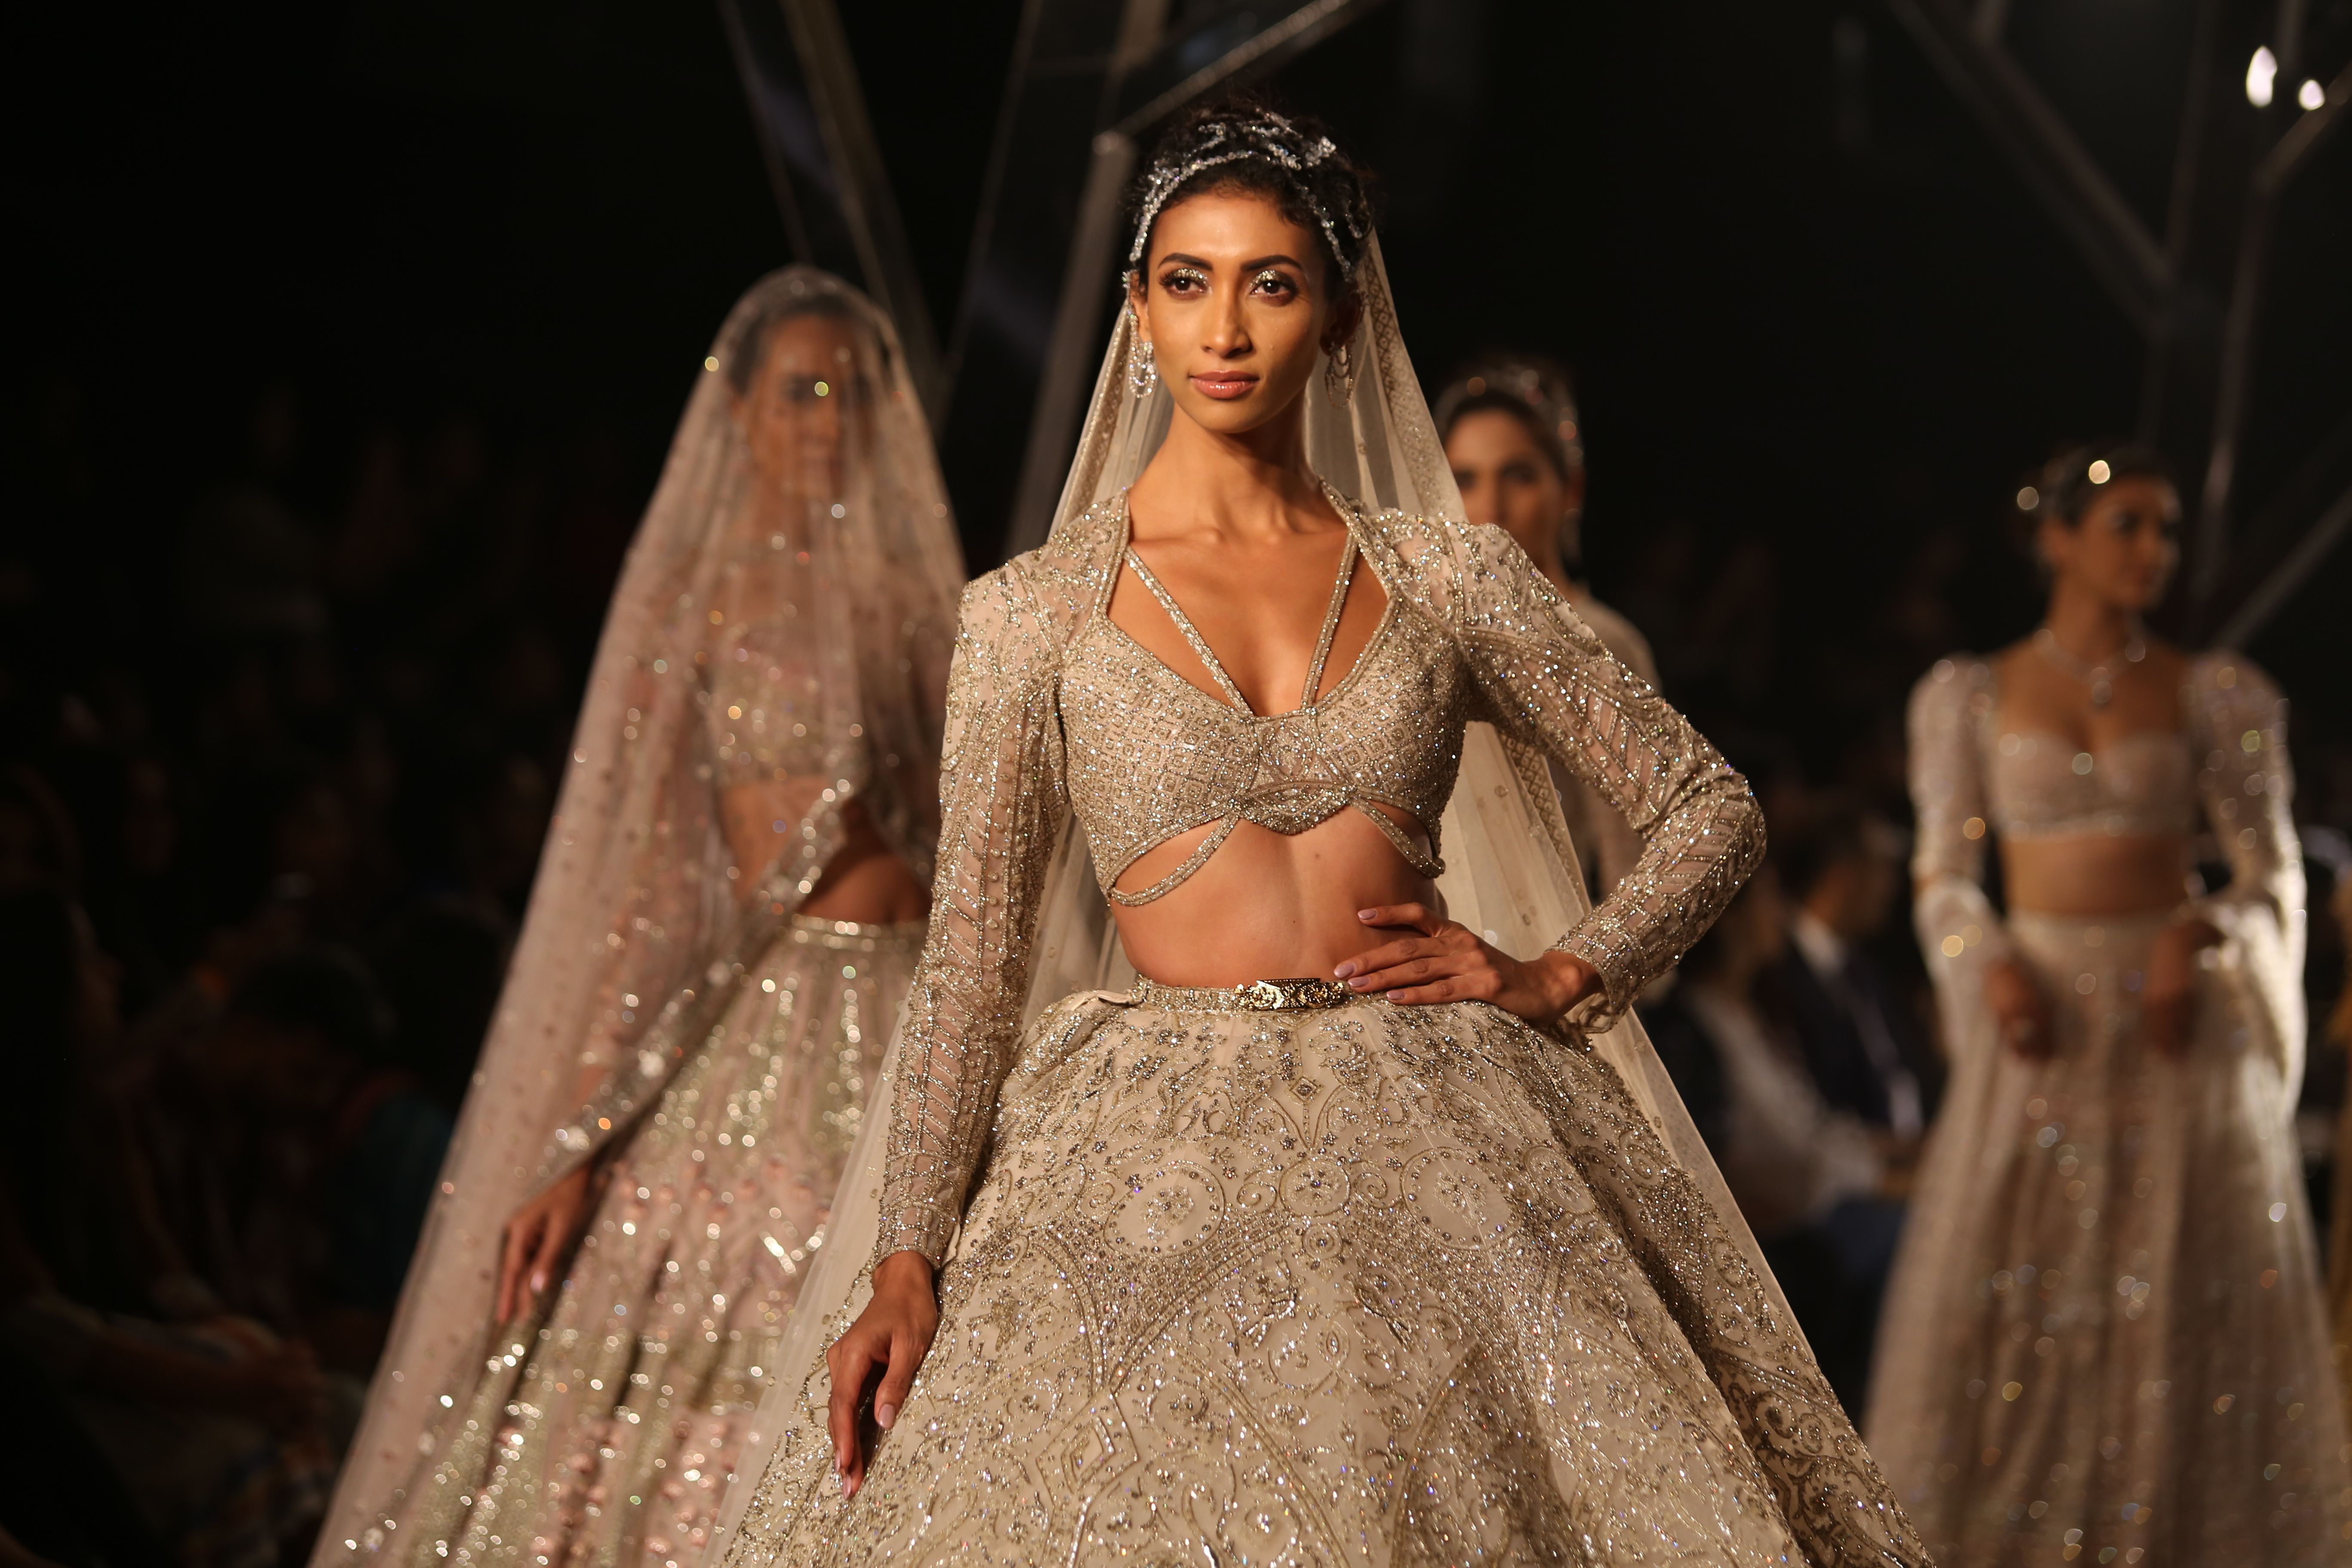 Brides looking to be different, here are the best looks from India Couture Week 2019